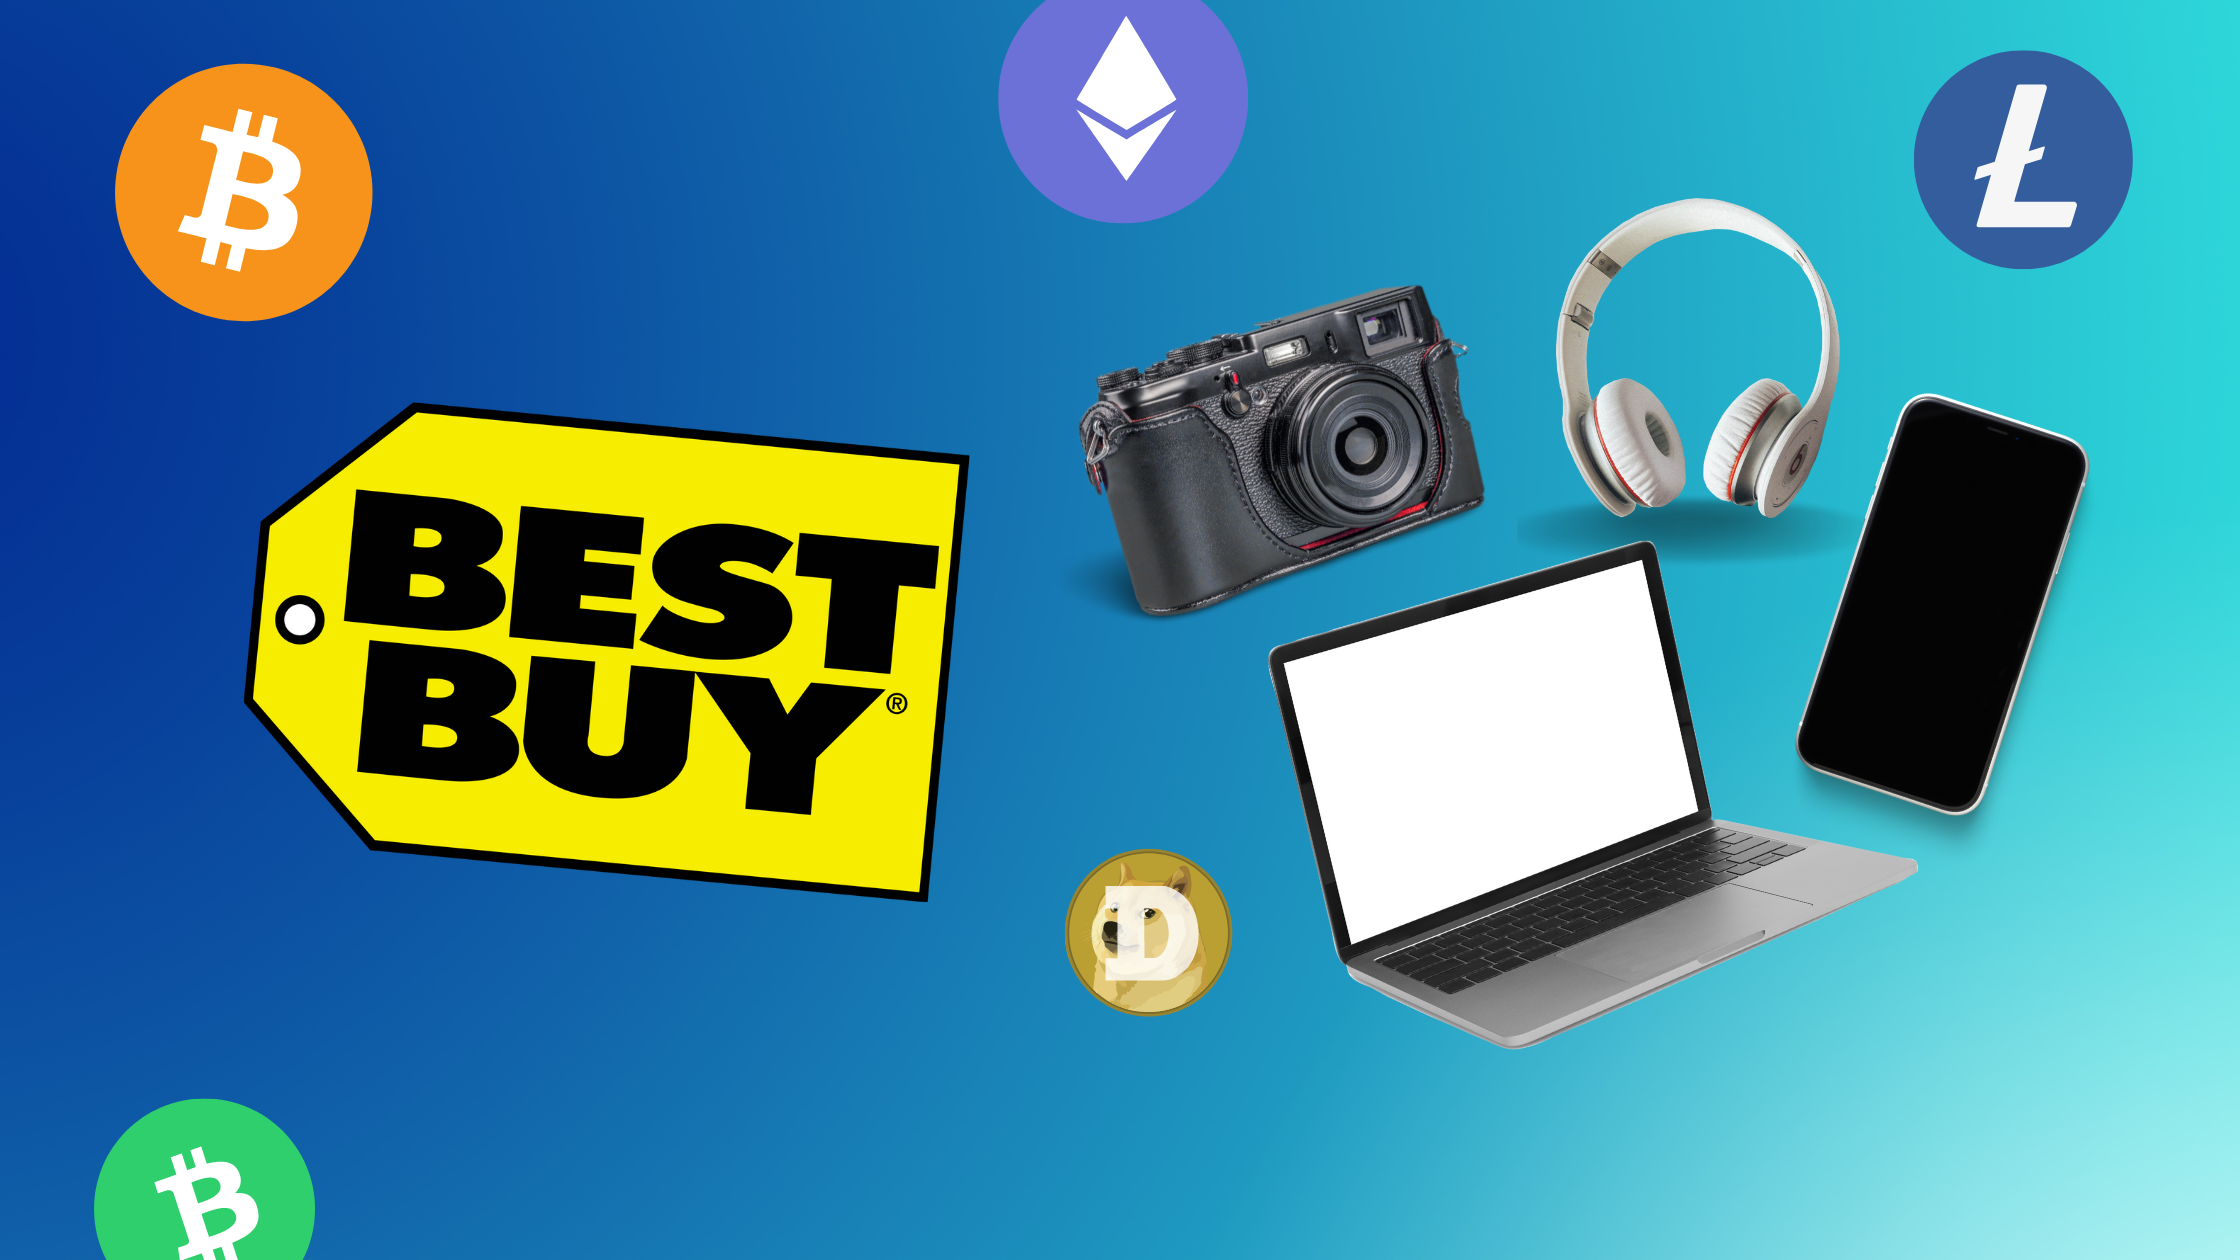 Sell Bitcoin for Best Buy Gift Cards | Buy Best Buy Gift Card with Crypto - CoinCola